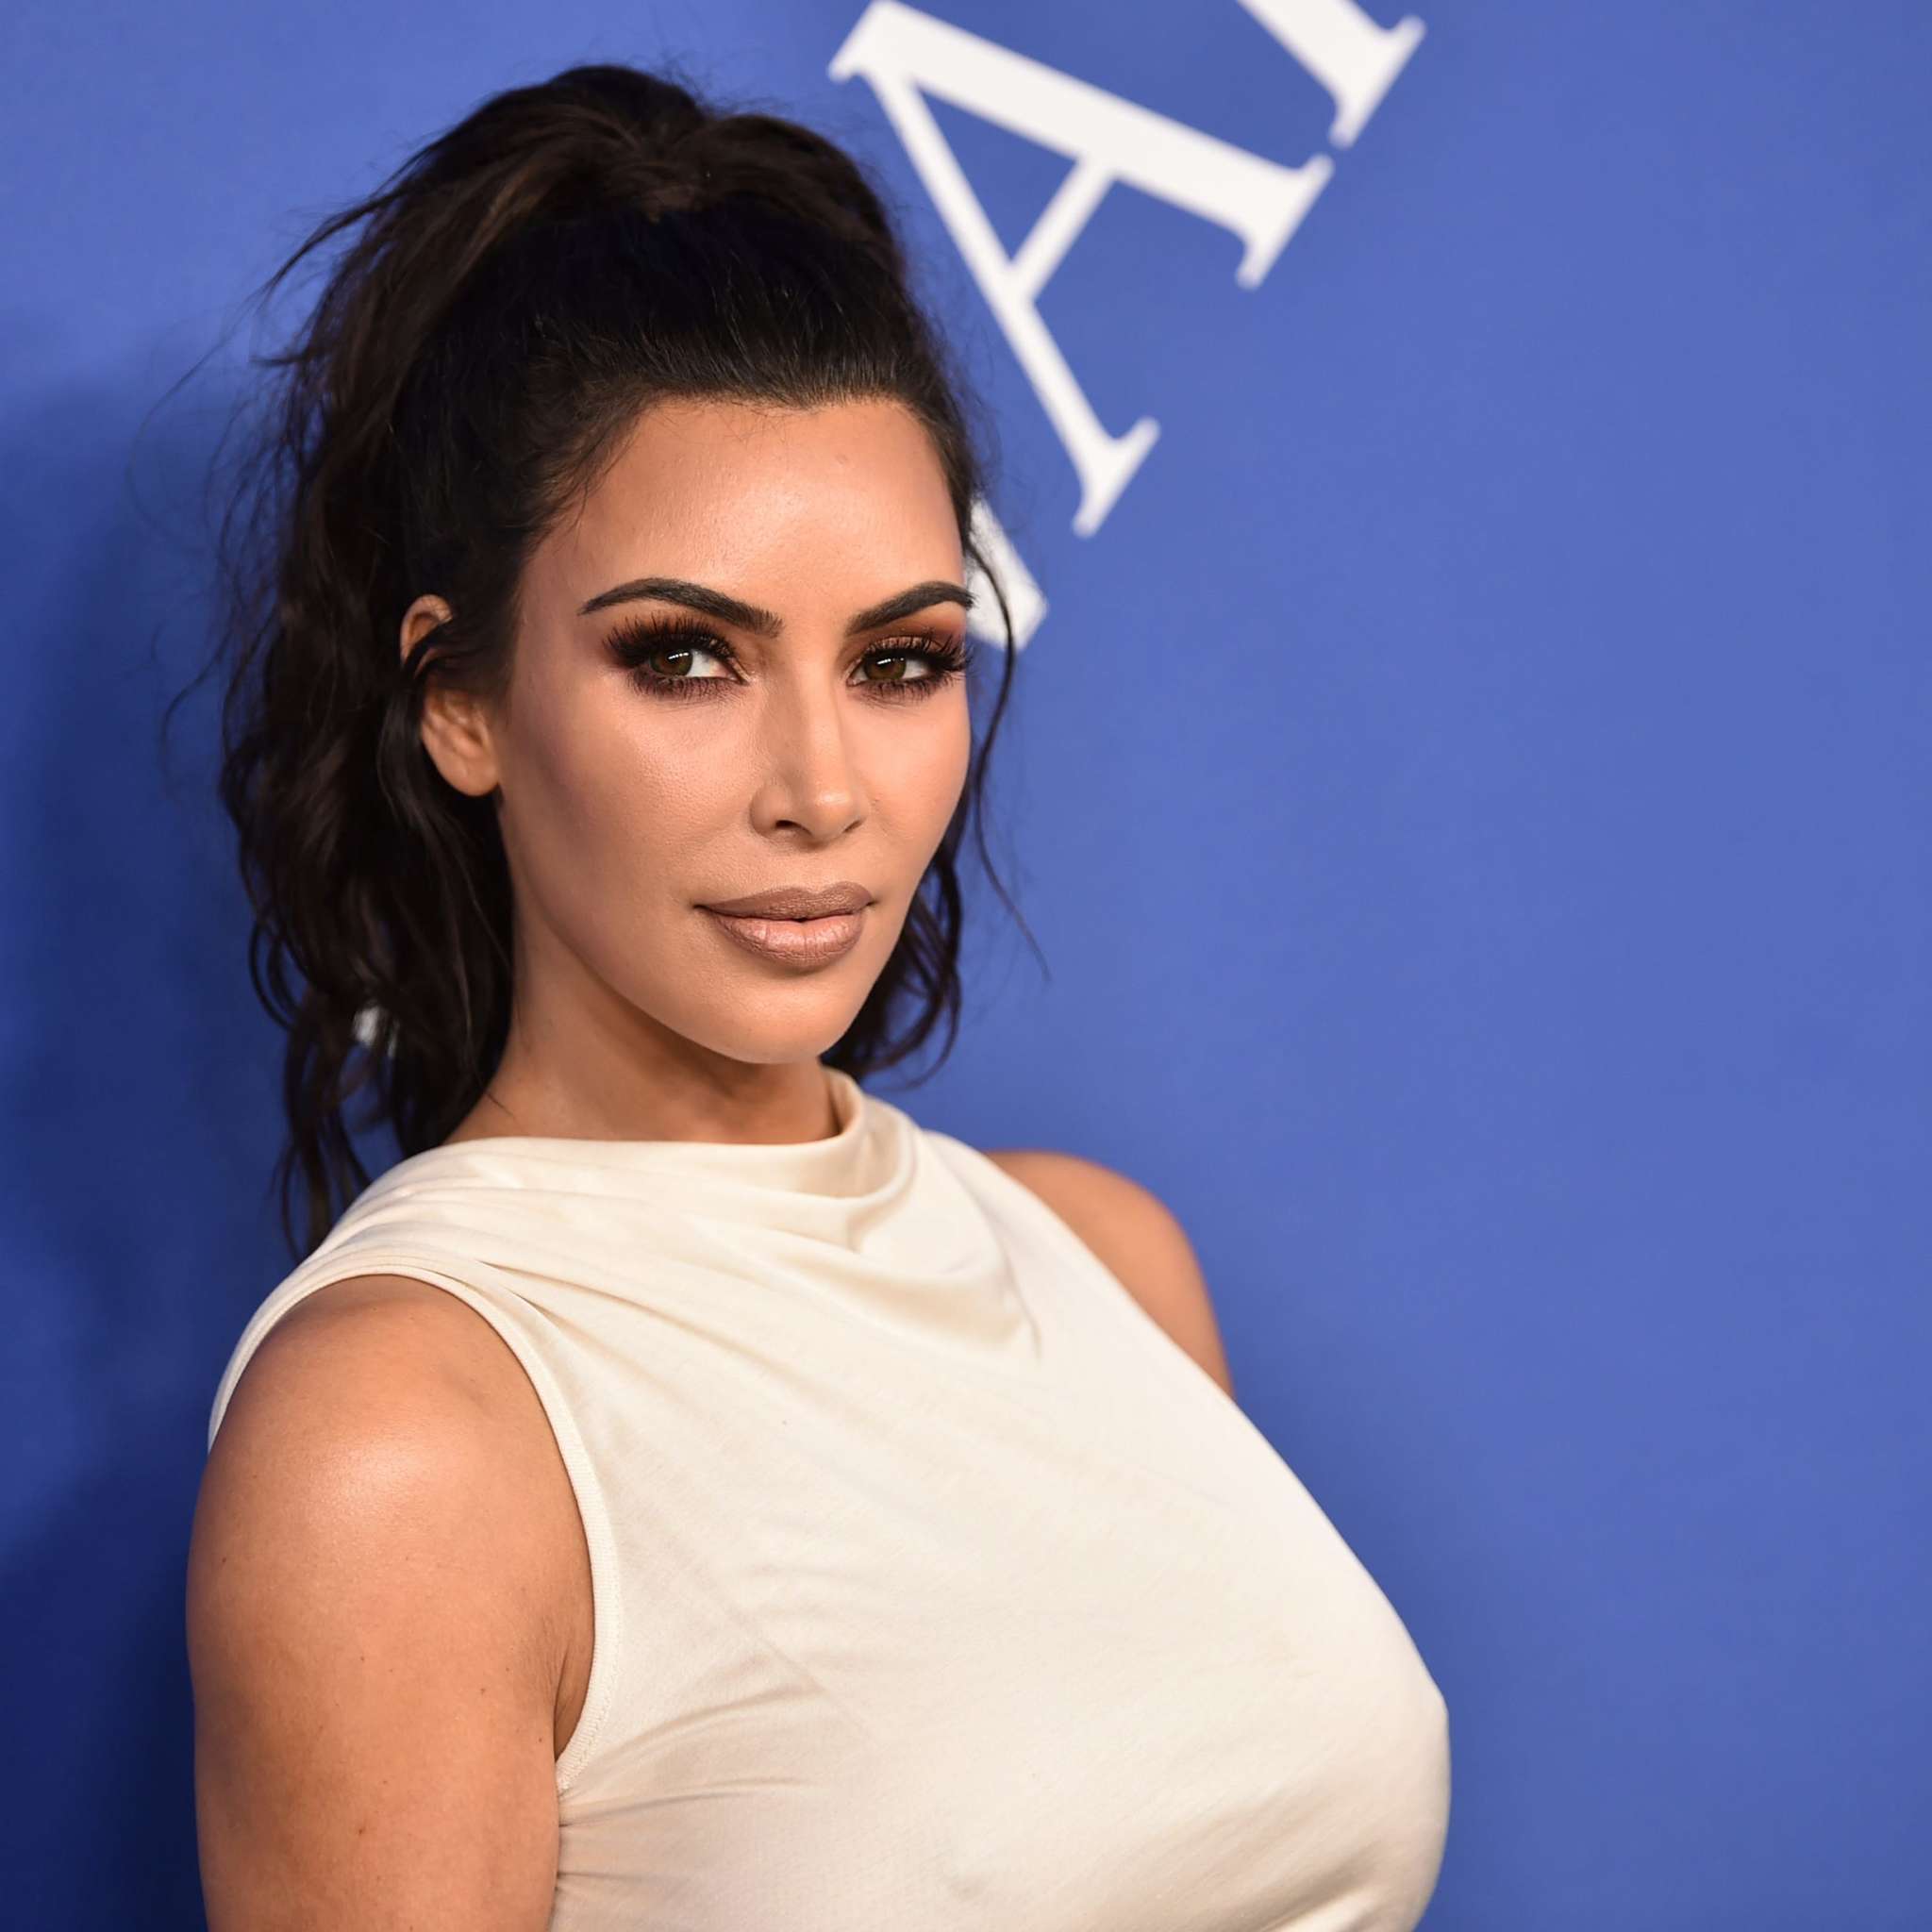 Kim Kardashian Turns Her House Into A Spider Web For Halloween - See The Clips That Triggered Massive Backlash